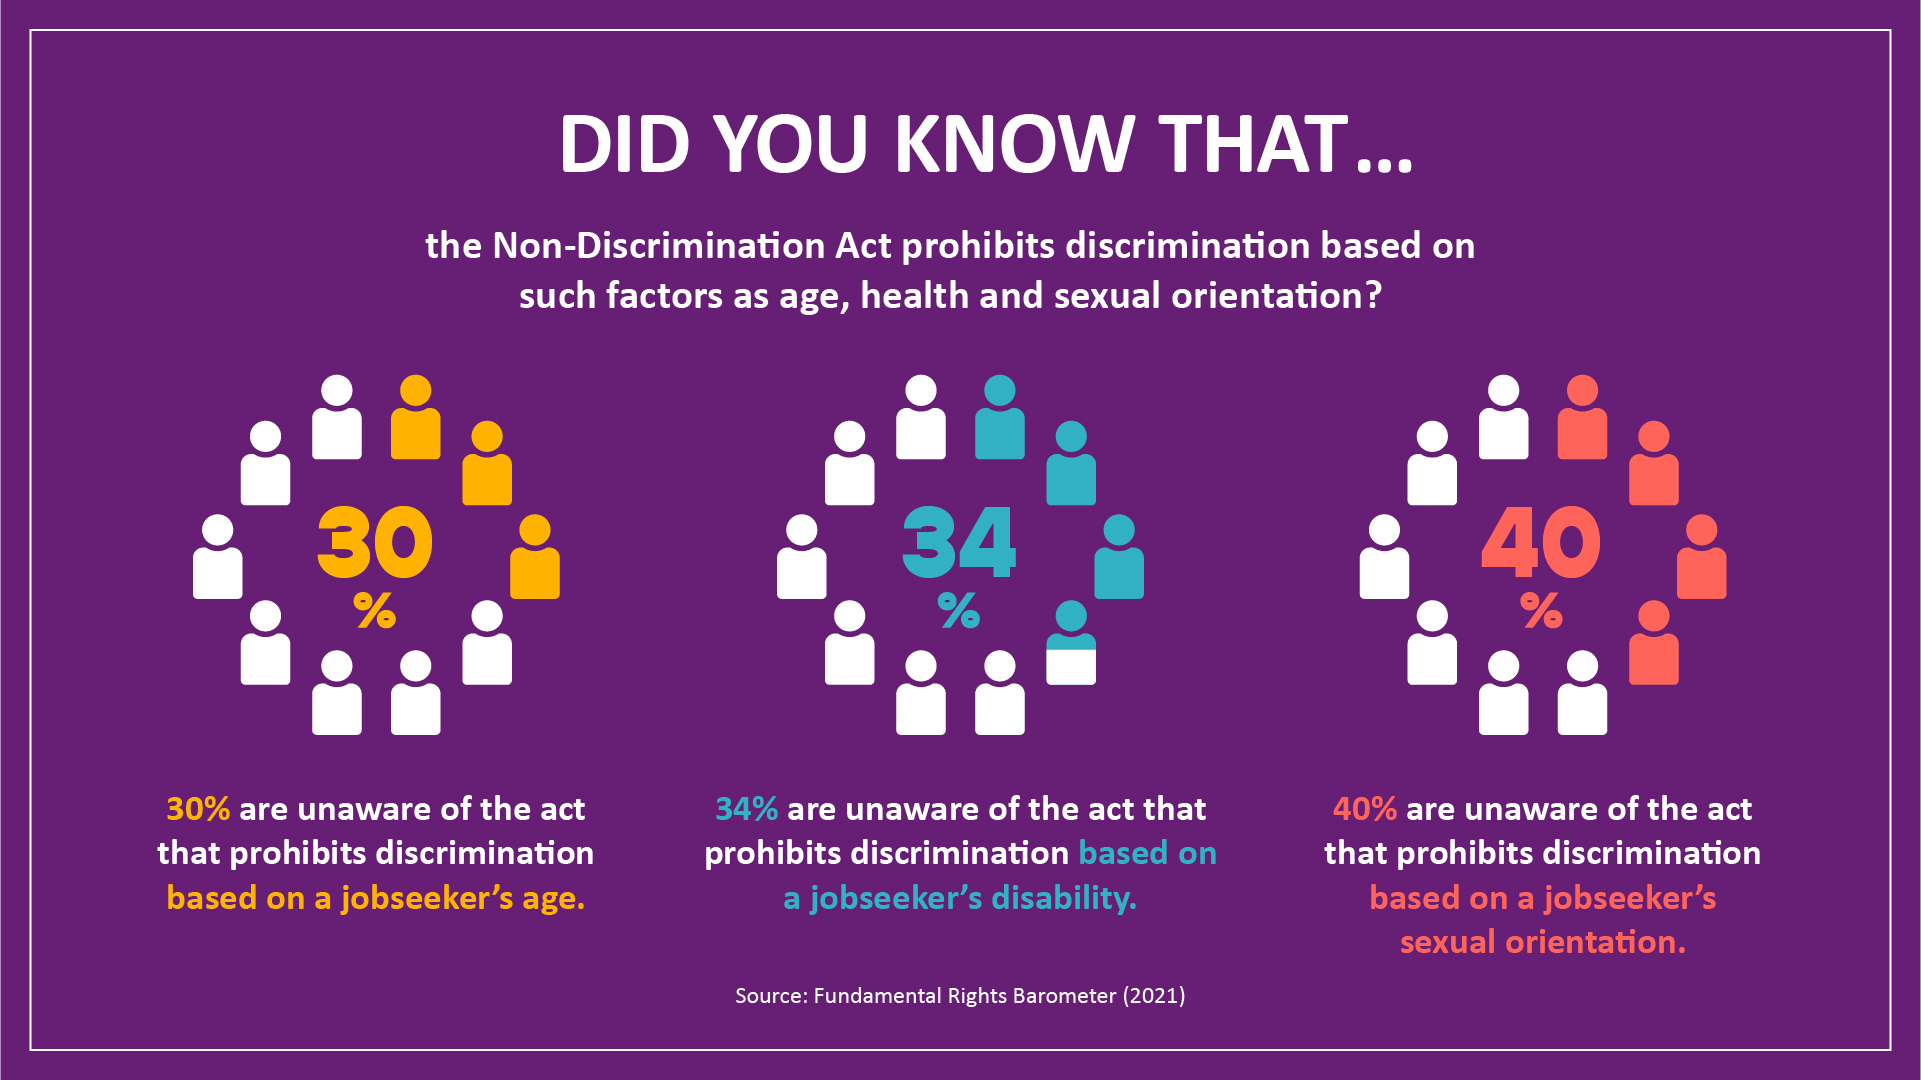 An infograph that reads: Did you know that the Non-Discrimination Act prohibits discrimination based on such factors as age, health and sexual orientation? 30% are unaware of the act that prohibits discrimination based on a jobseeker’s age. 34% are unaware of the act that prohibits discrimination based on a jobseeker’s disability. 40% are unaware of the act that prohibits discrimination based on a jobseeker’s sexual orientation. Source: Fundamental Rights Barometer (2021).